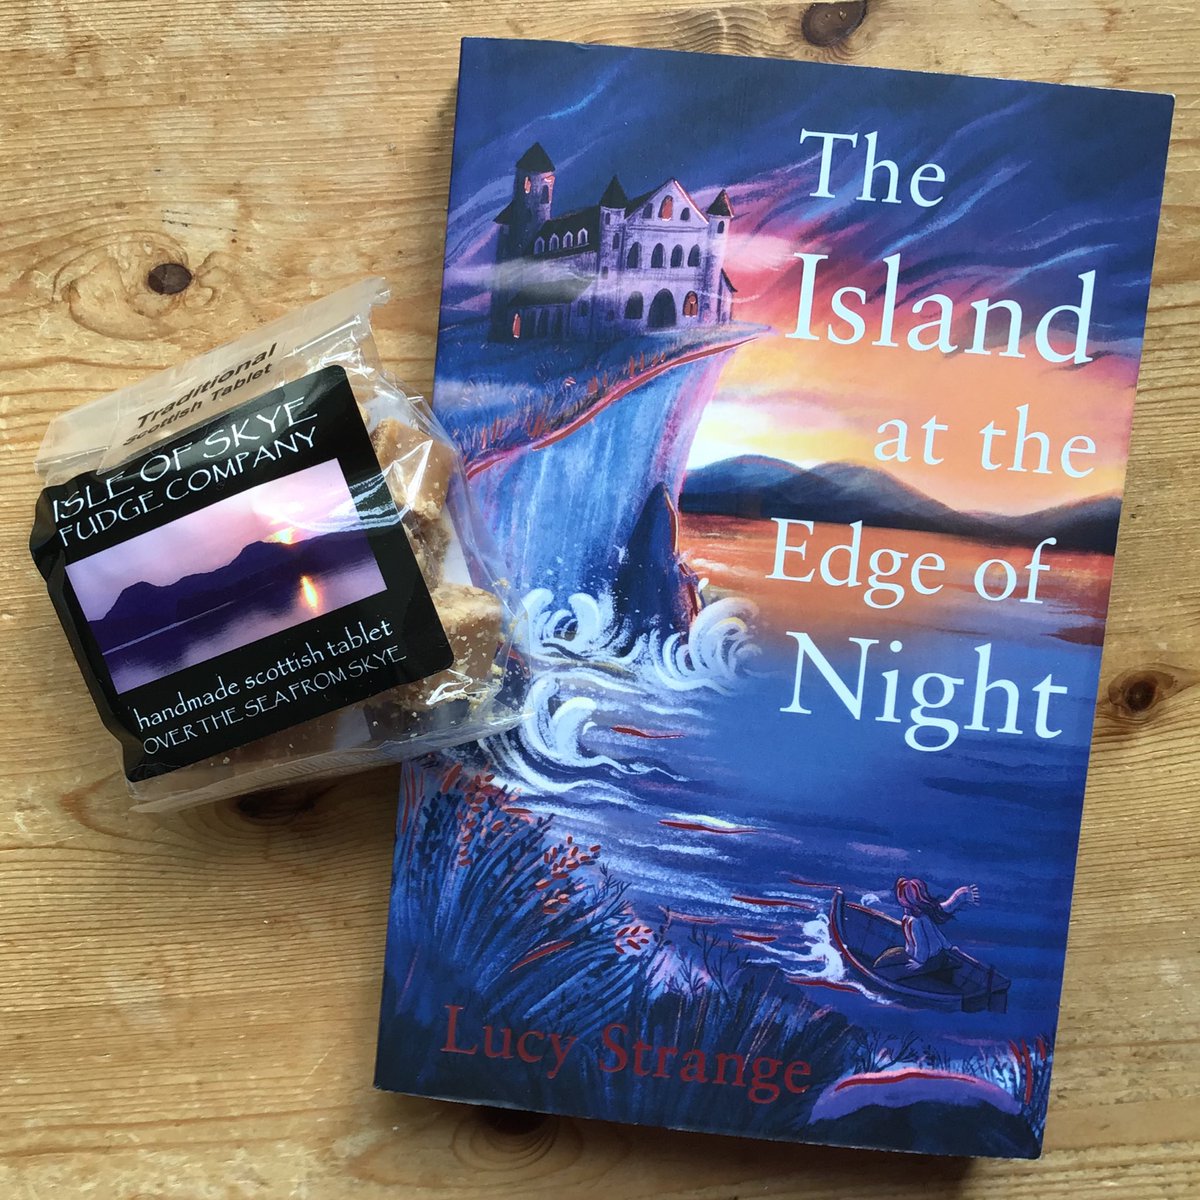 Lovely evening celebrating the launch of @theLucyStrange's brilliant #TheIslandAtTheEdgeOfNight. Huge thanks to @_jo_clarke and @LollyPopPR in particular for calming my nerves and to everyone else who chatted to me. Another dedicated book for my collection and some tablet too! 🥰